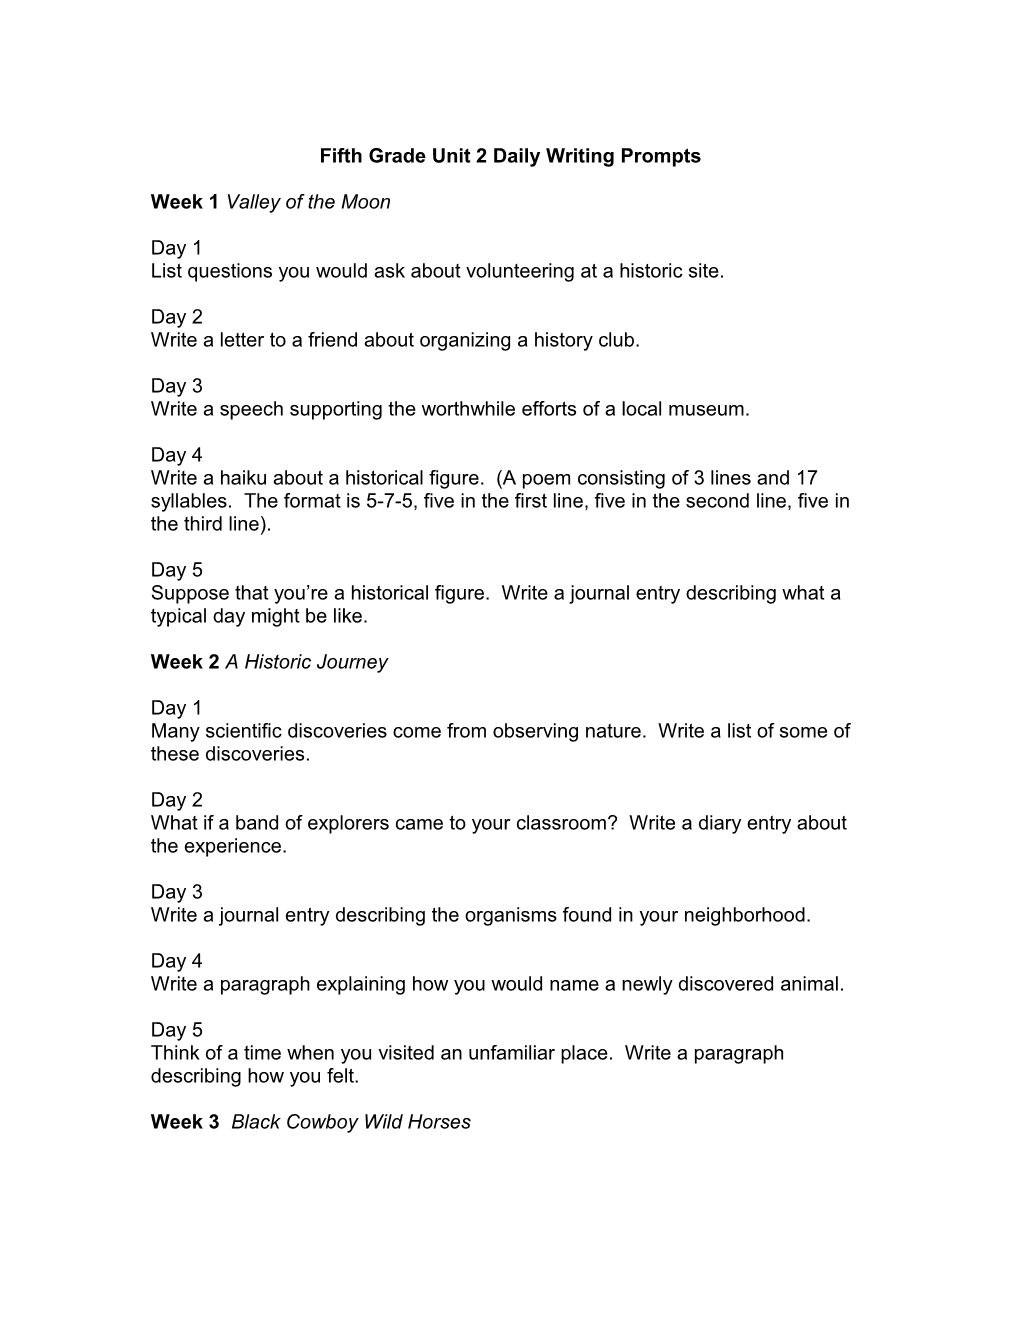 Fifth Grade Unit 2 Daily Writing Prompts